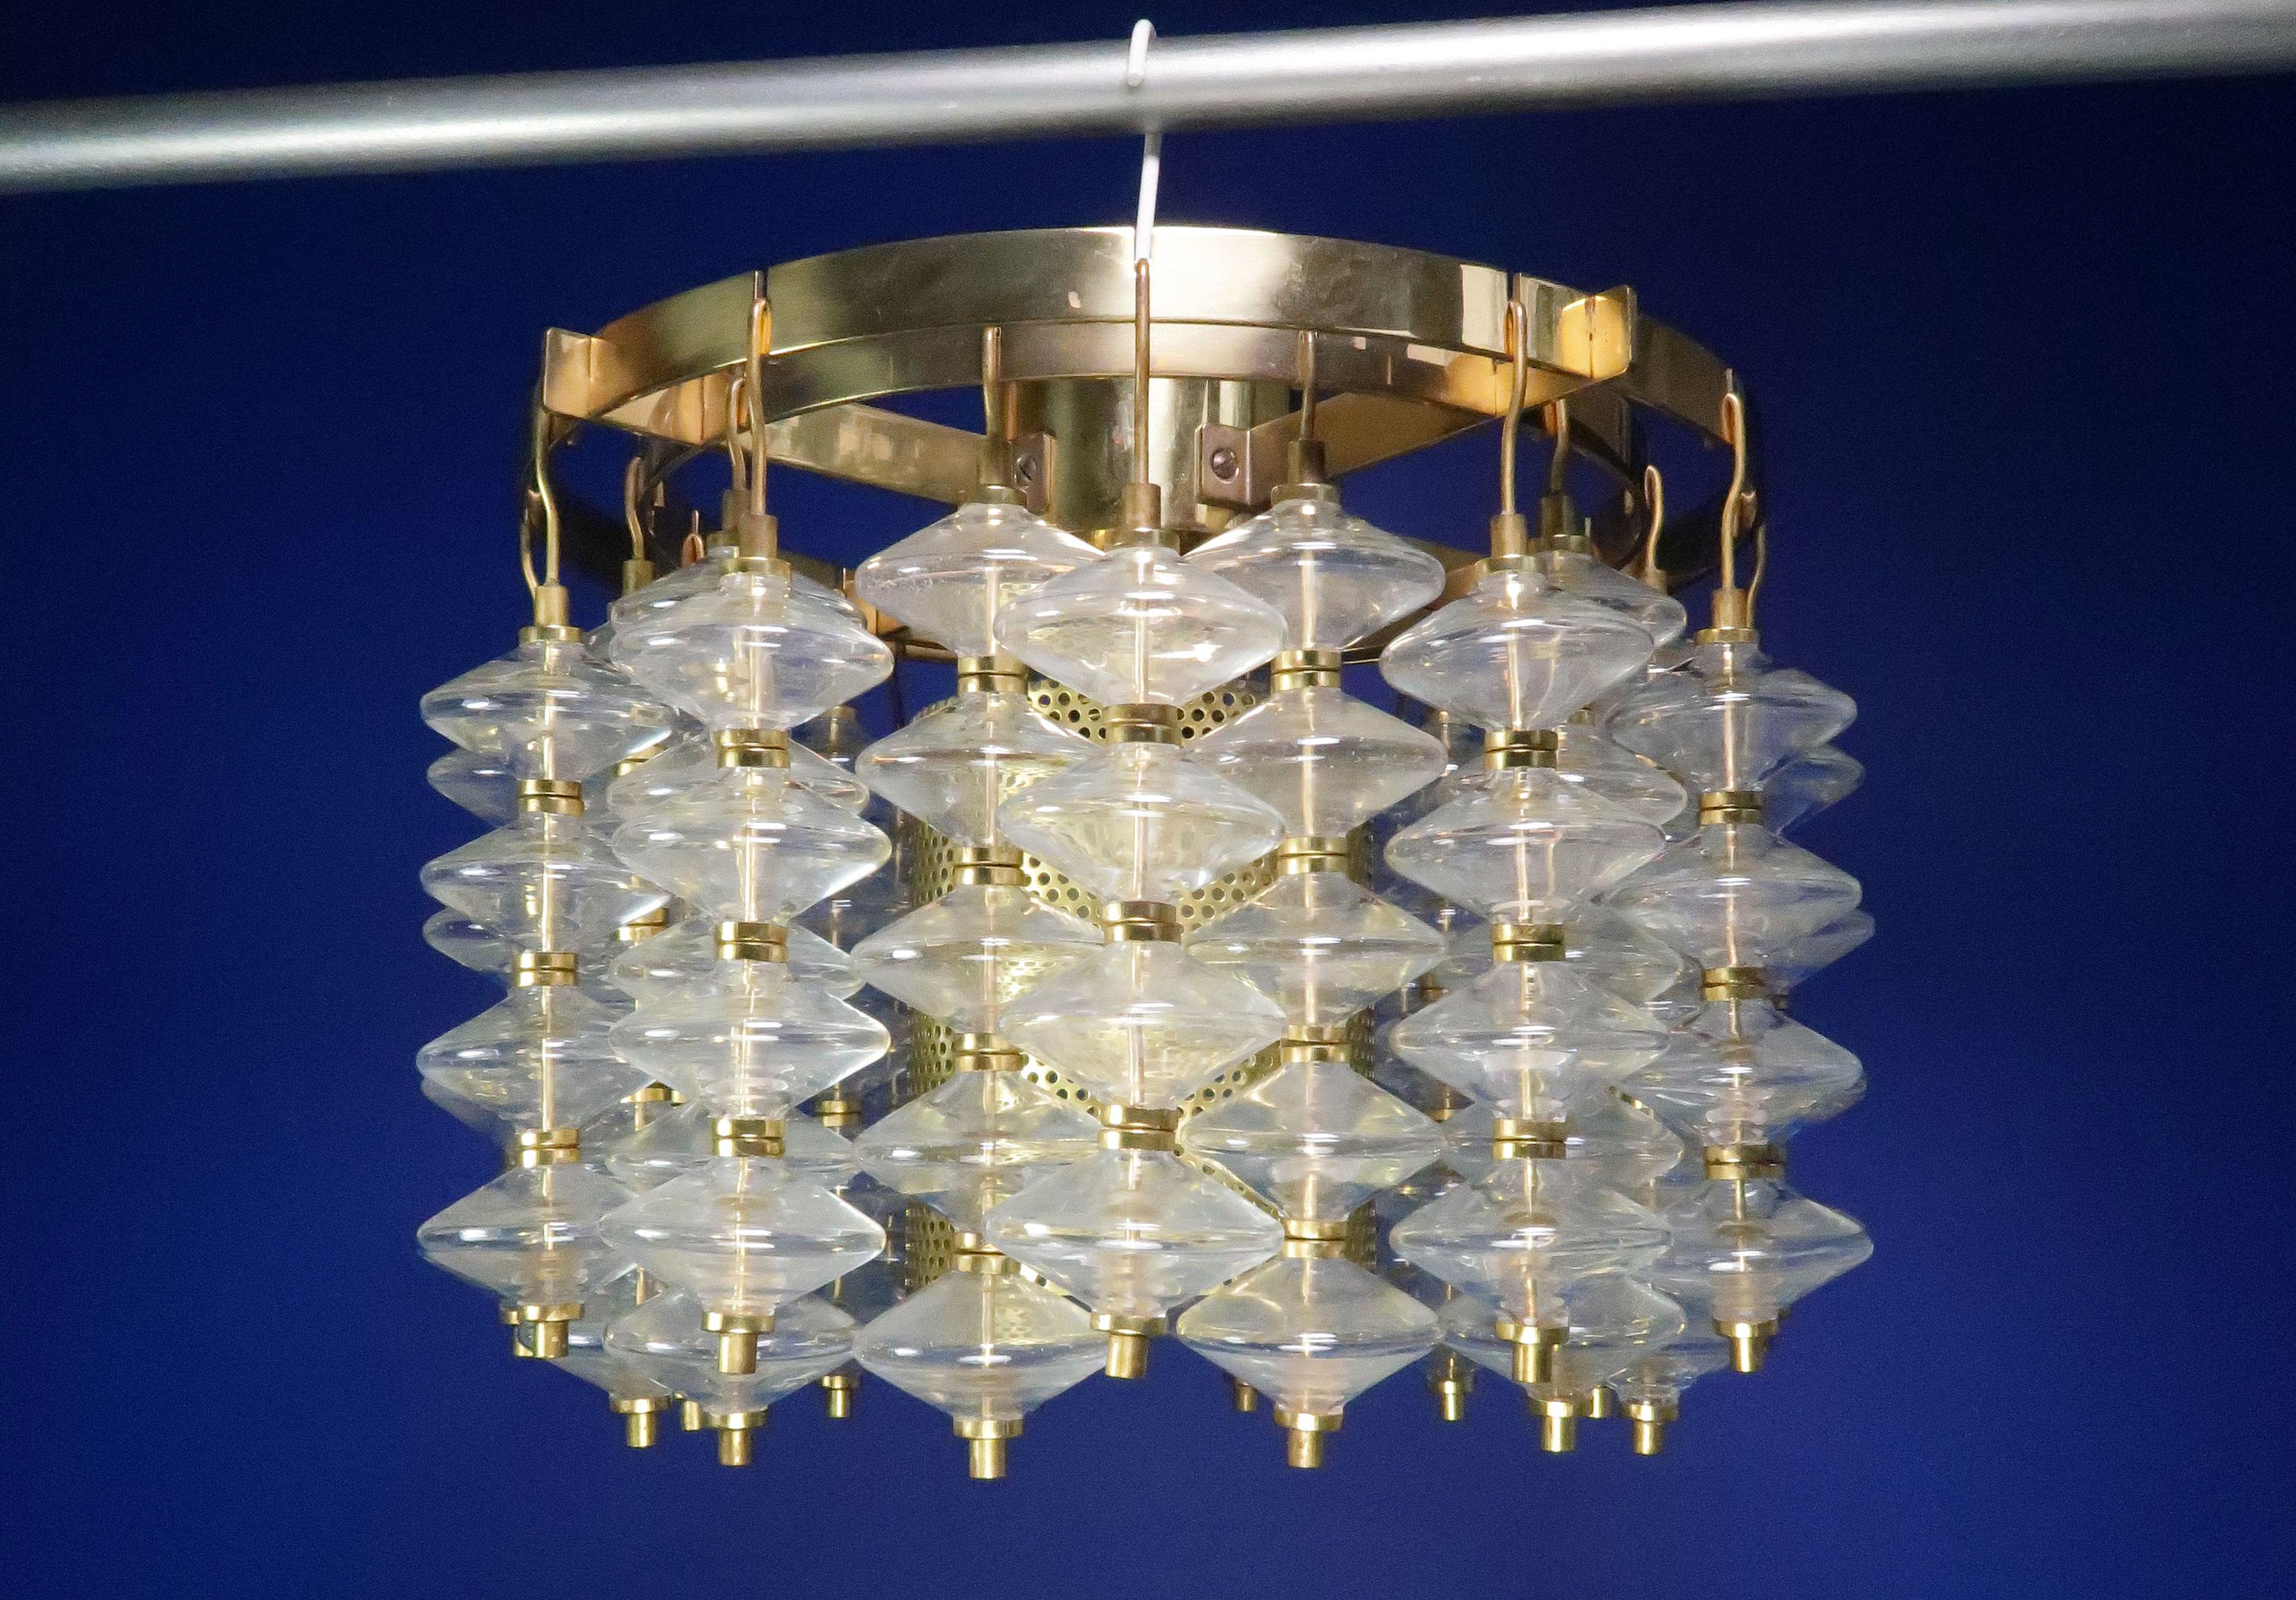 Stunning Hans Agne Jakobsson glass and brass Scandinavian Mid-Century Modern circular chandelier for Jakobsson Markaryd in 1966. Clear smooth glass prisms mounted on 24 hanging brass strands in two rows on frame in polished brass. Model Estrella